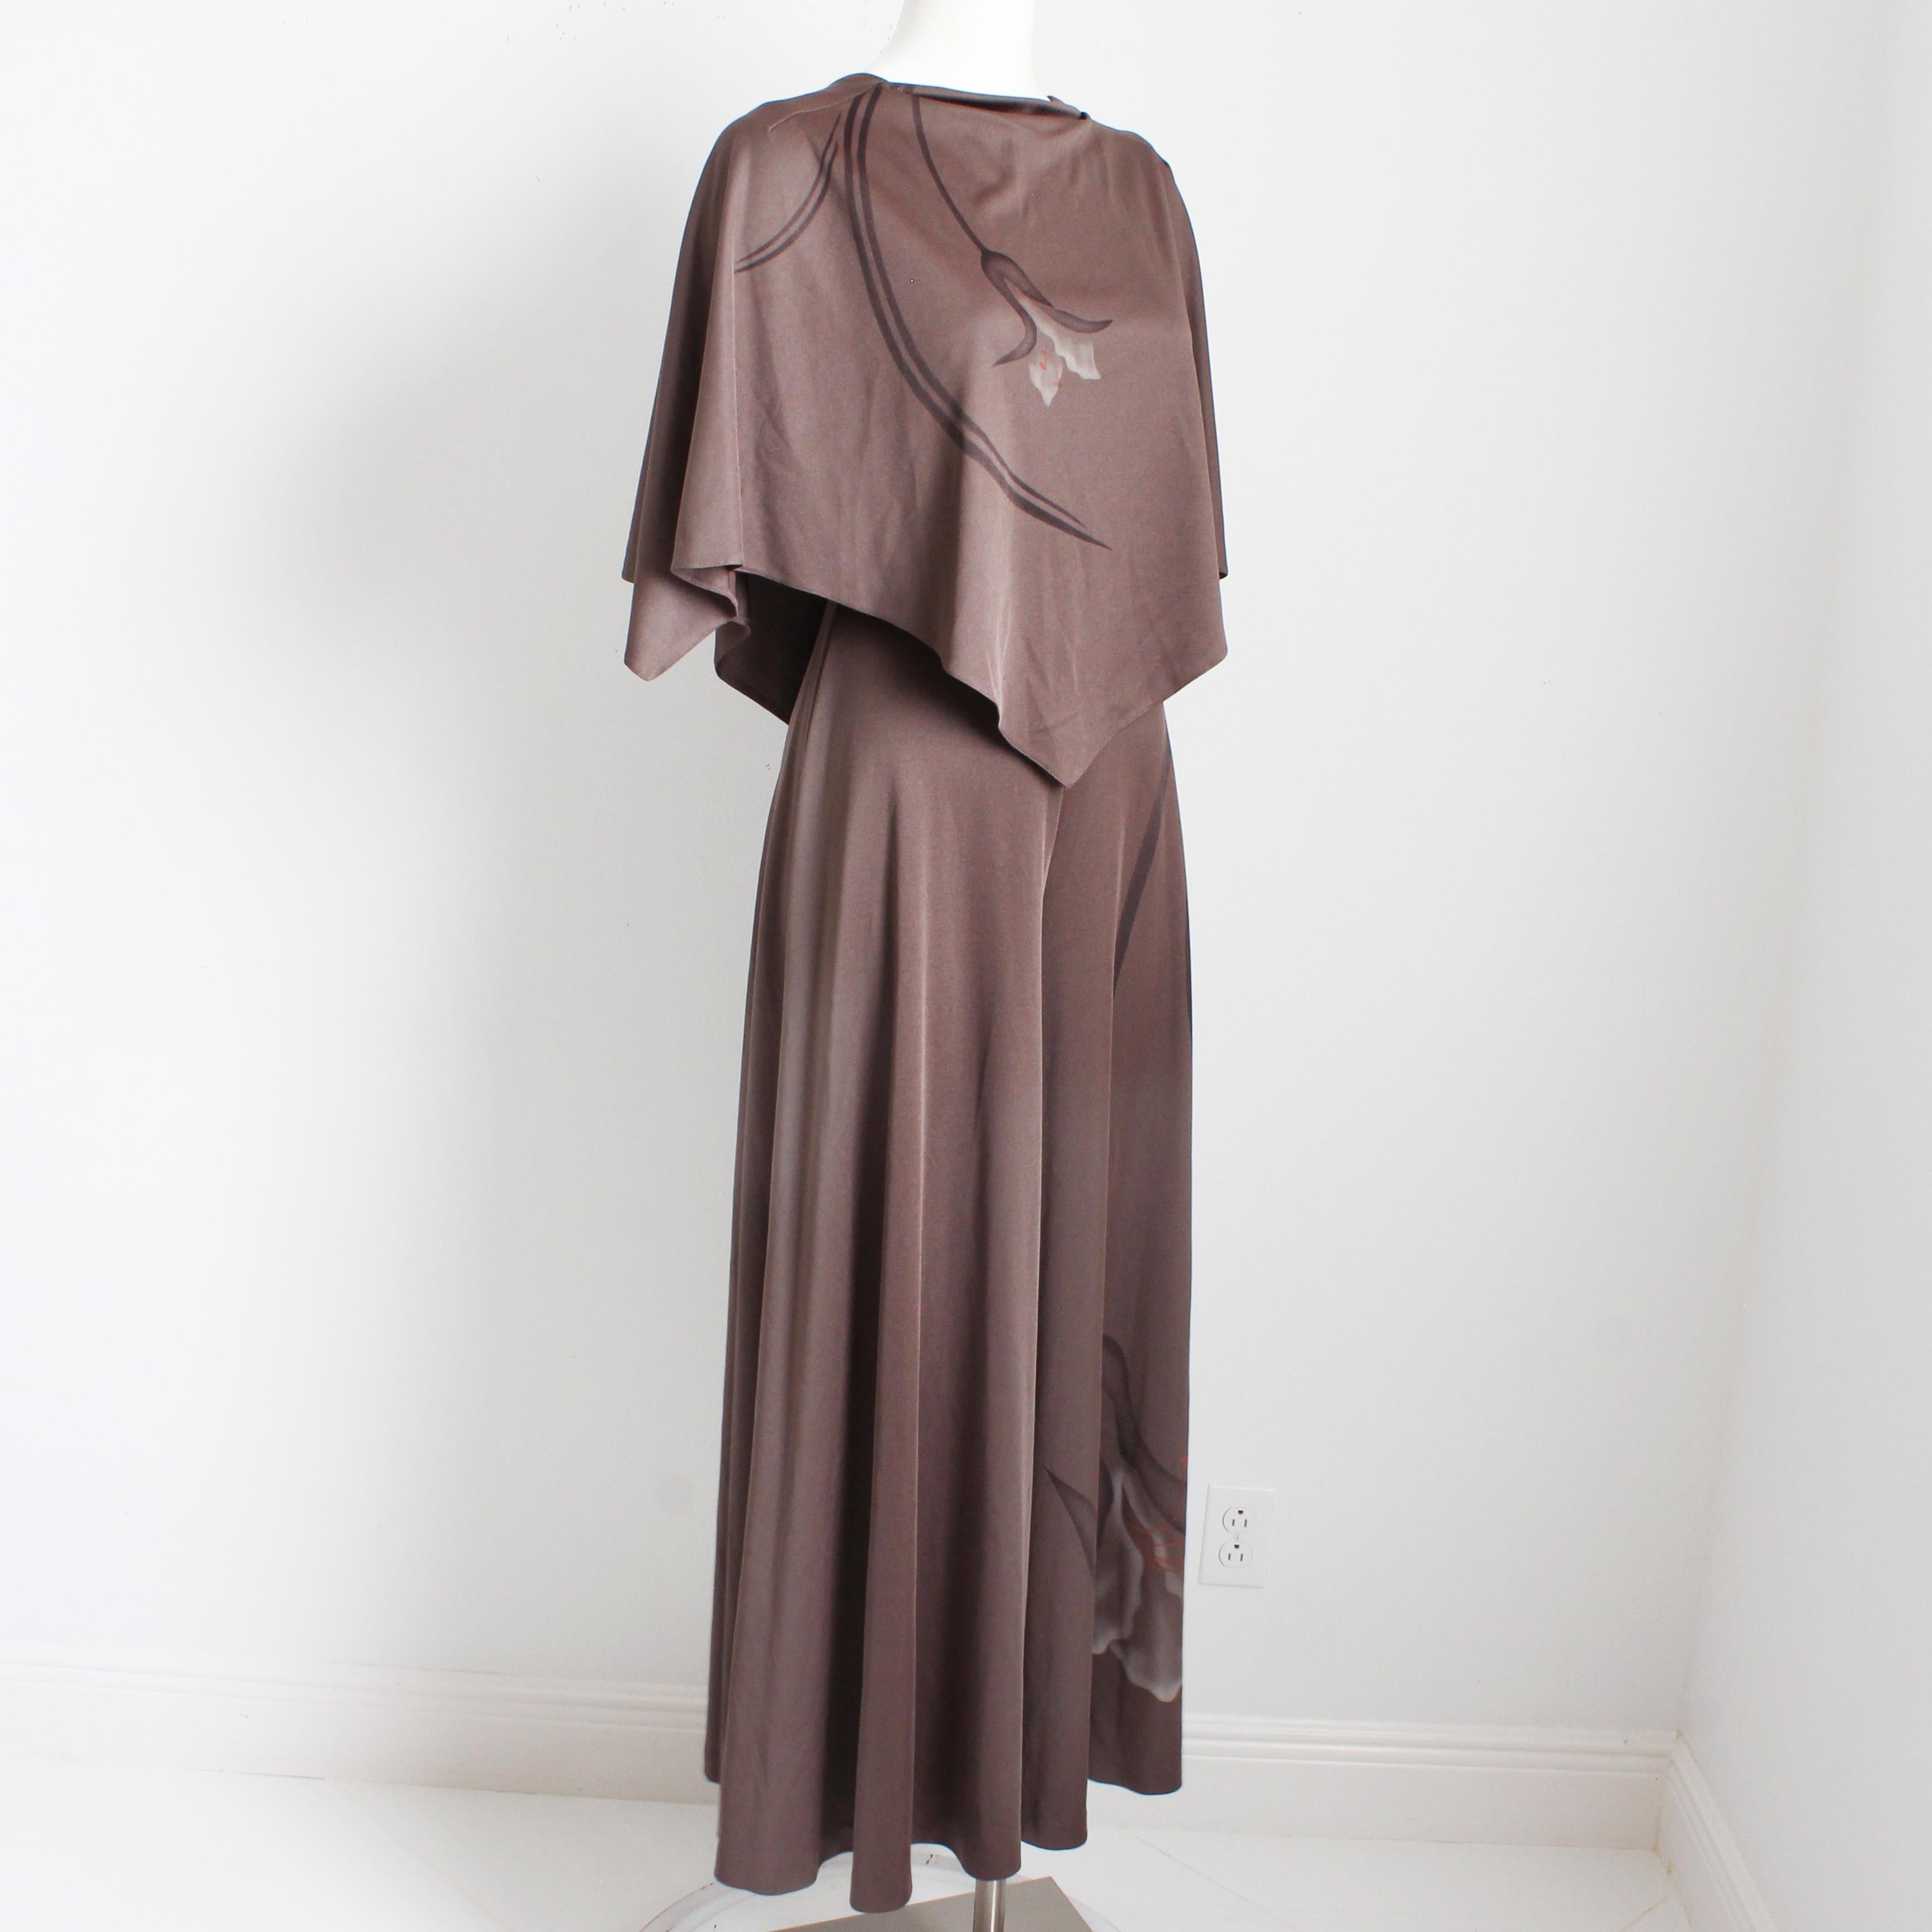 Preowned, vintage Lillie Ruben jumpsuit, likely made in the mid 1970s. Made from taupe-hued brown jersey fabric with a simple floral print, it features an attached caplet at the bodice, a V-back, and wide leg, palazzo style pants!

Incredibly rare!